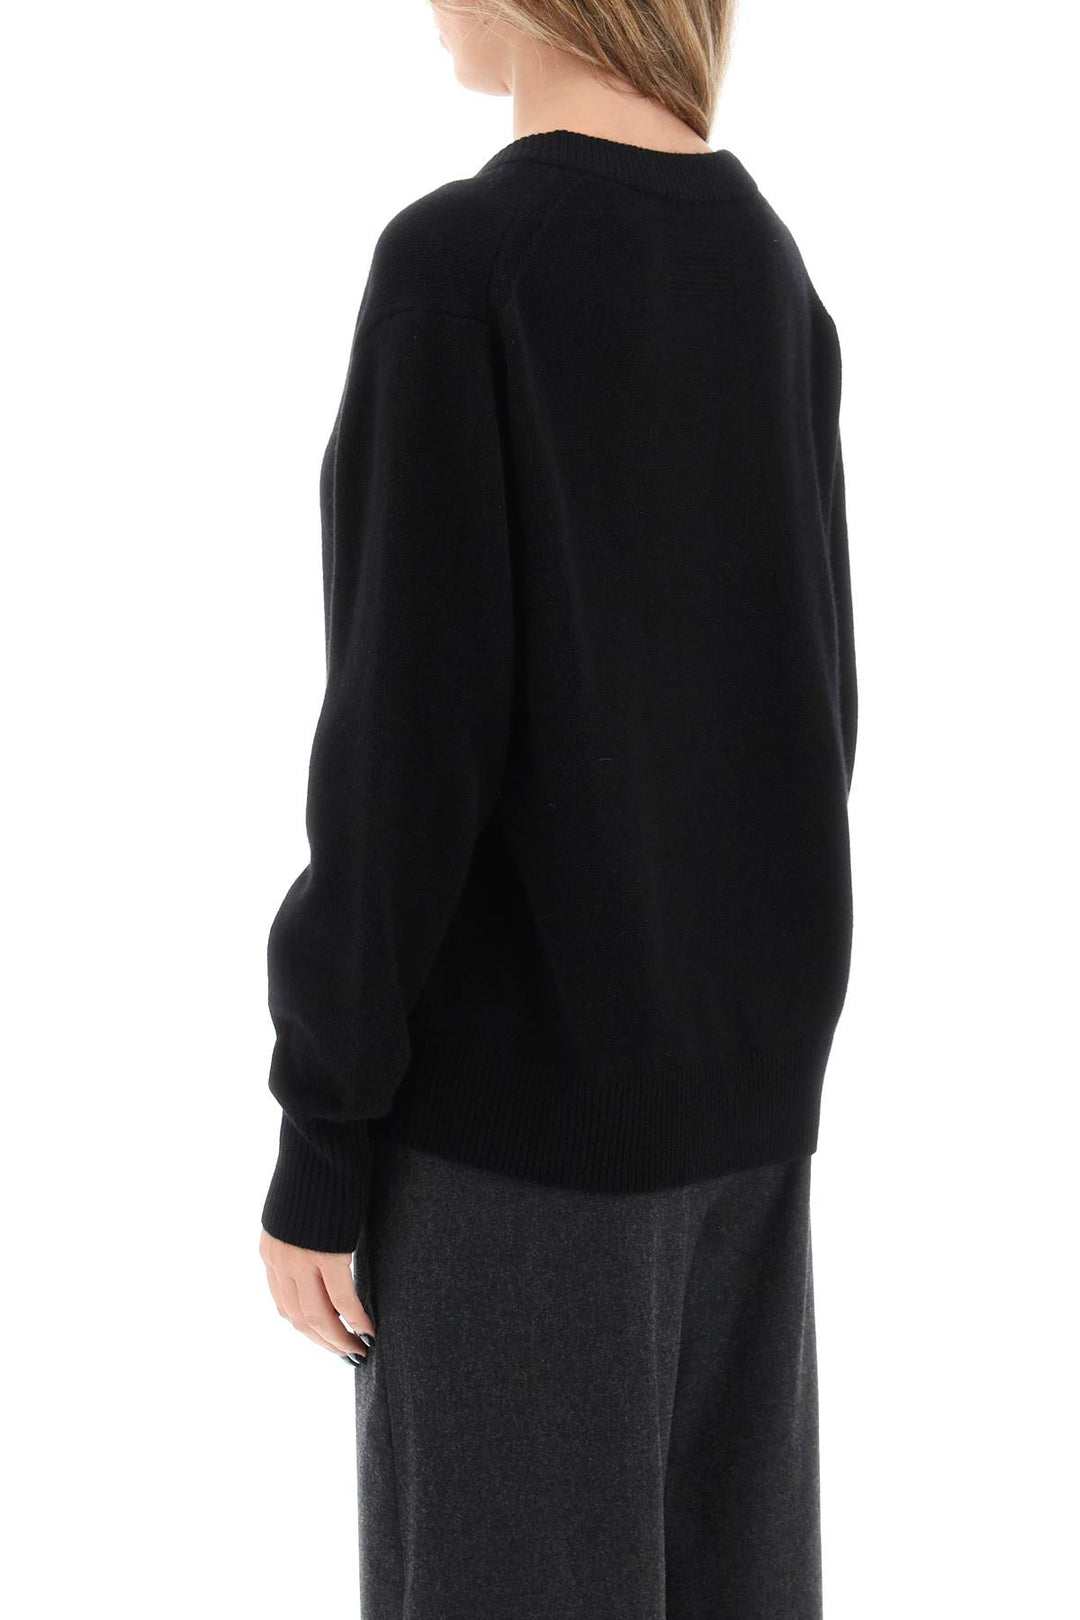 Guest In Residence The V Cashmere Sweater   Nero